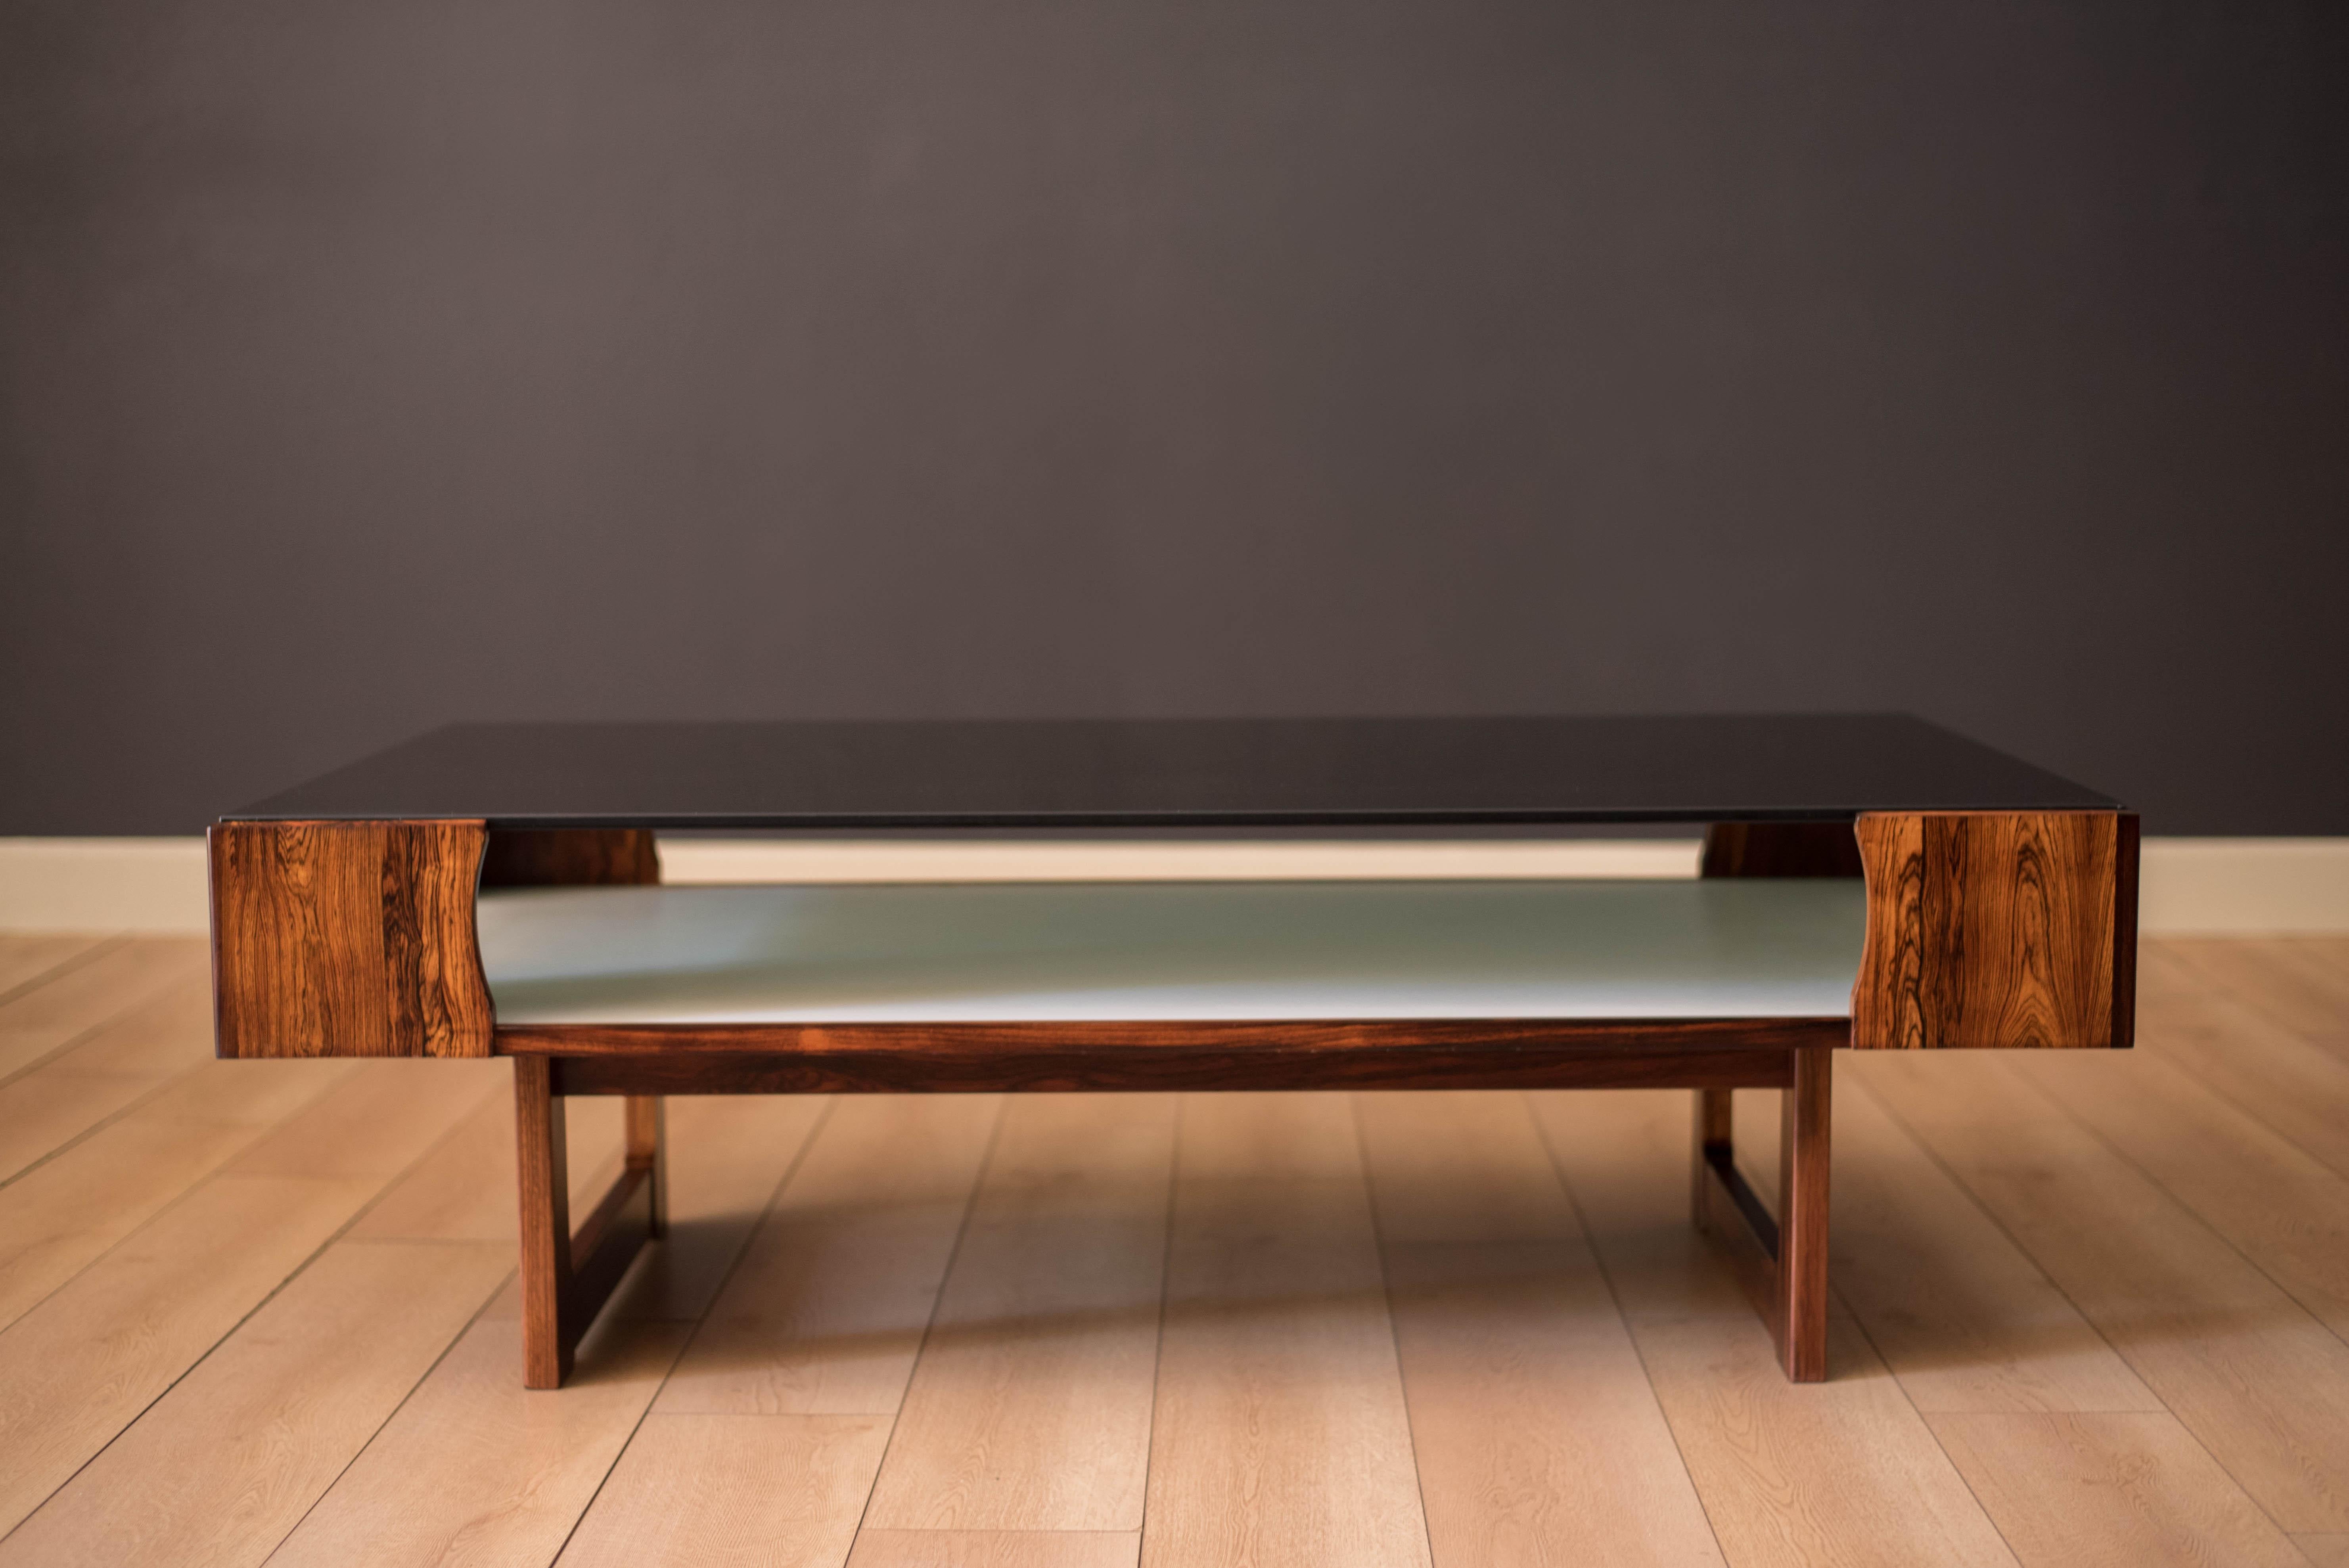 Vintage two tier coffee table in rosewood designed by Torbjorn Afdal for Bruksbo, Norway c. 1970's. This piece showcases from all angles featuring a smoked glass table top with a lower magazine shelf in white laminate for extra storage and easy